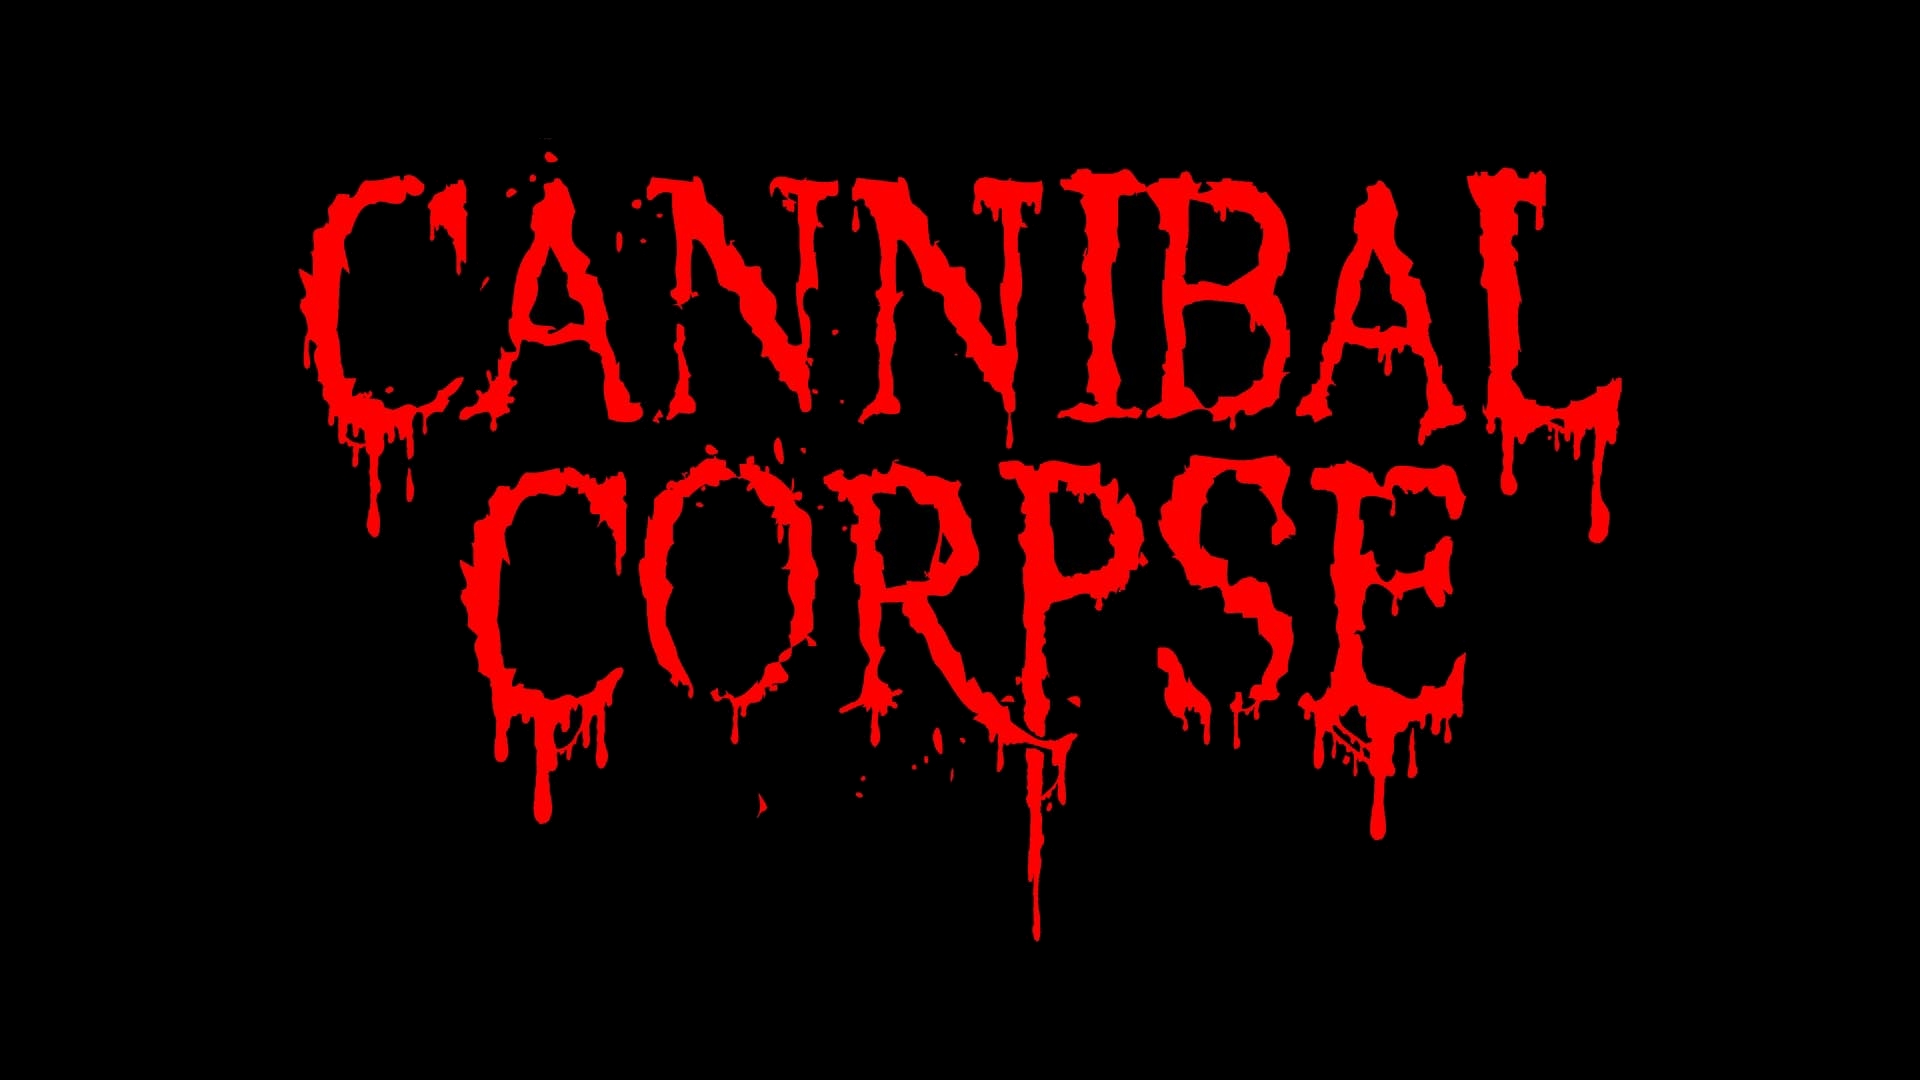 music, cannibal corpse wallpaper for mobile